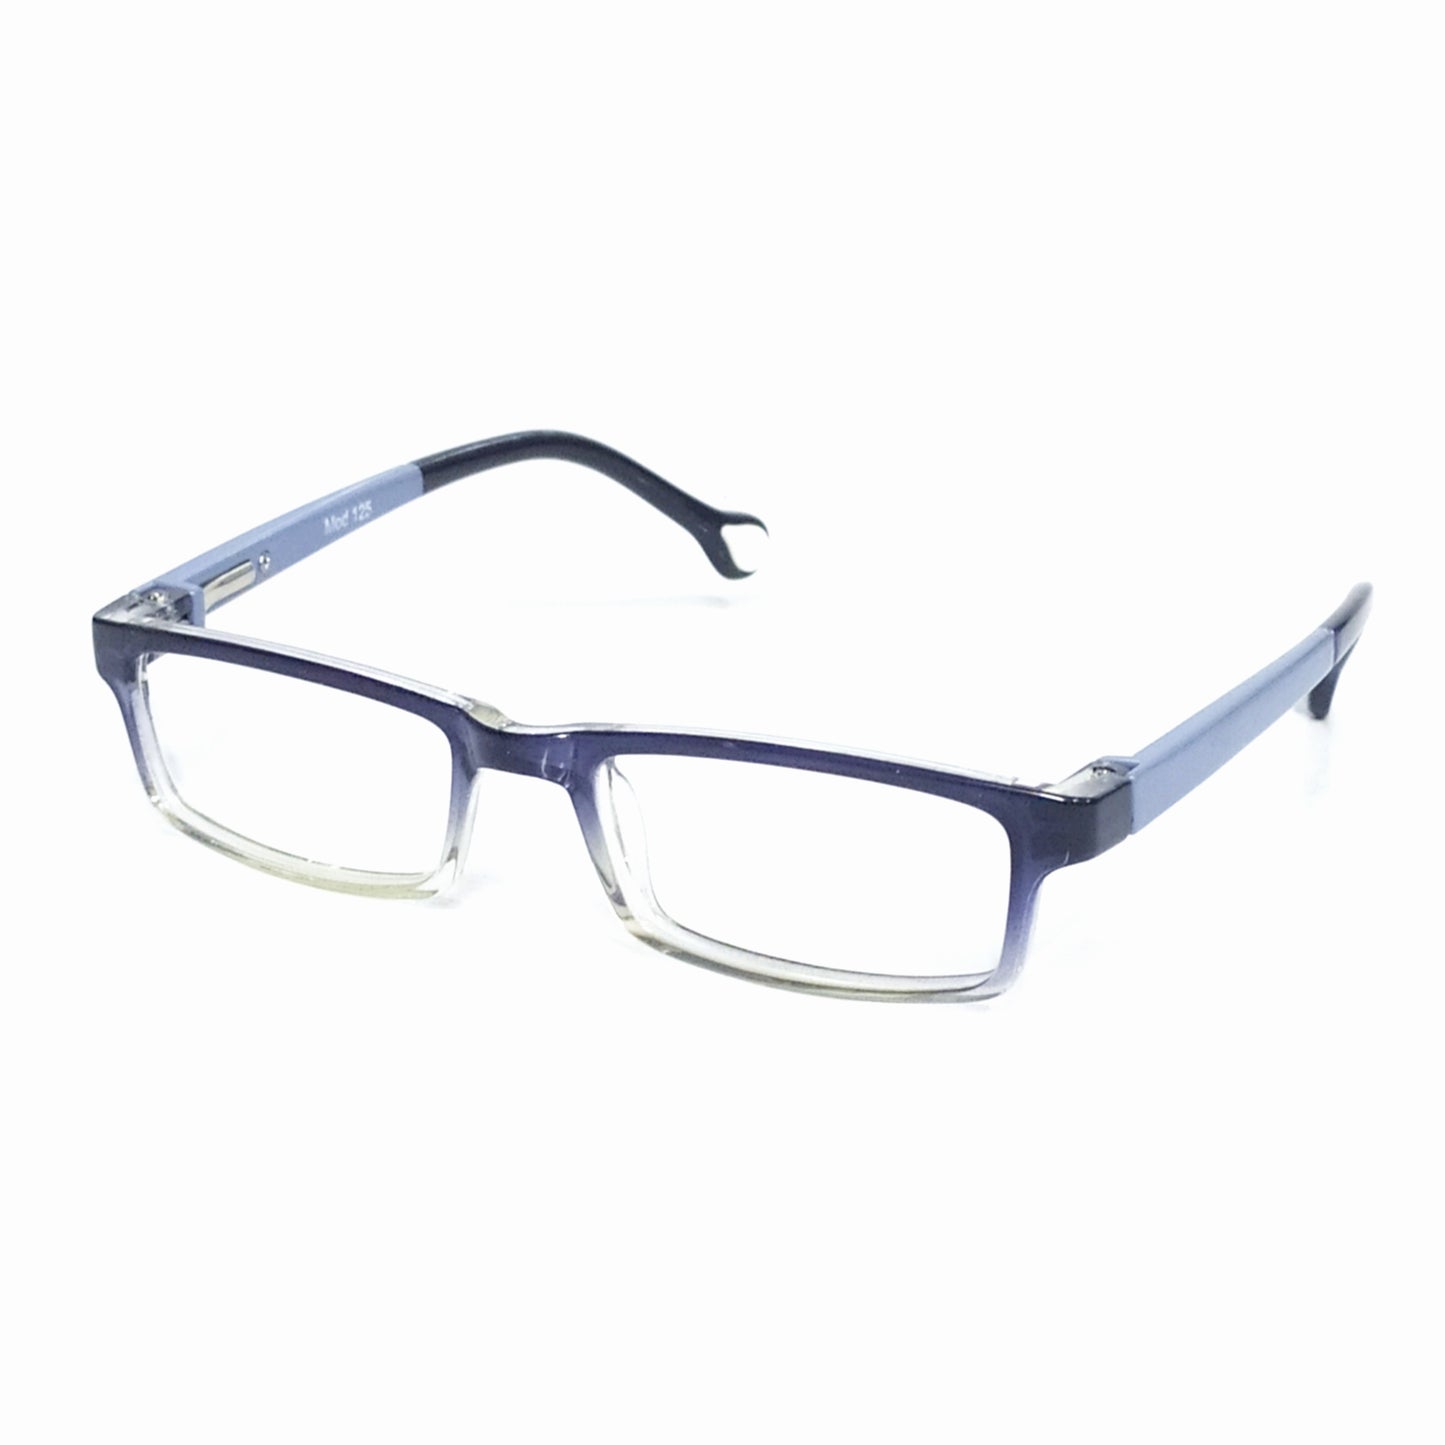 Grey Kids Spectacle Frames for Ages 3-5 Old